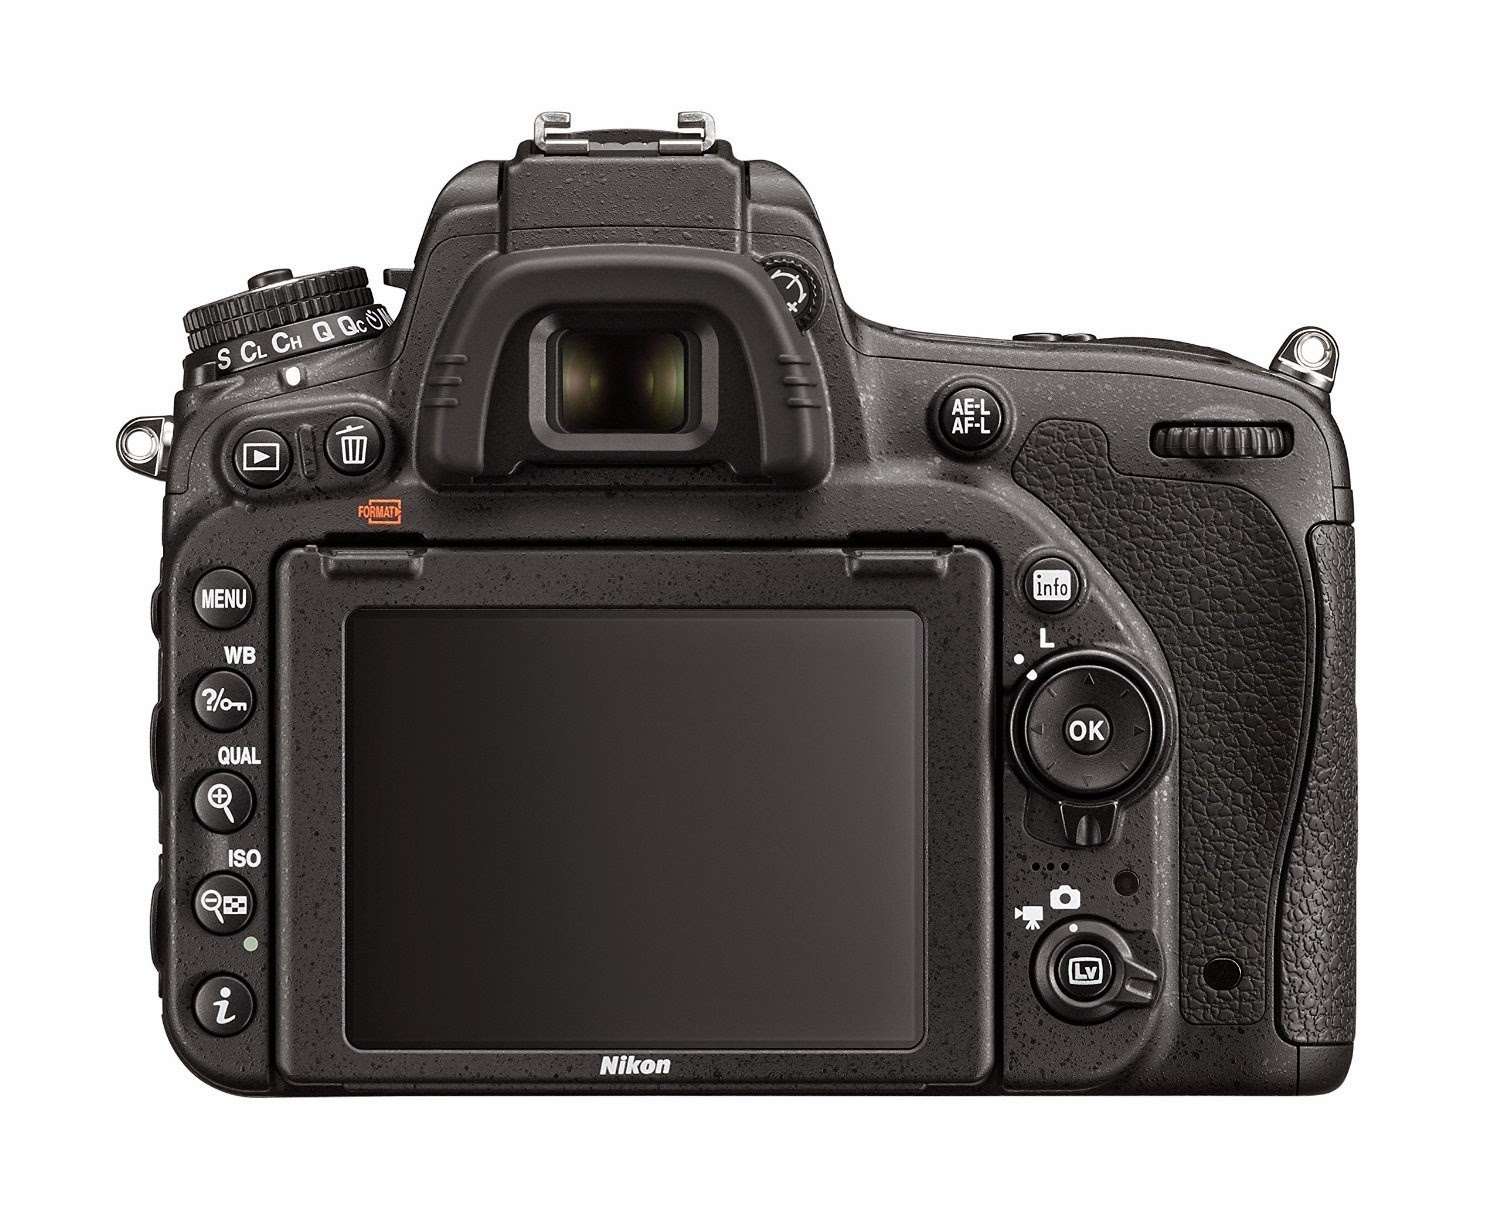 Nikon D750 rear view, picture, with tilting Vari-angle display screen, viewfinder, control buttons